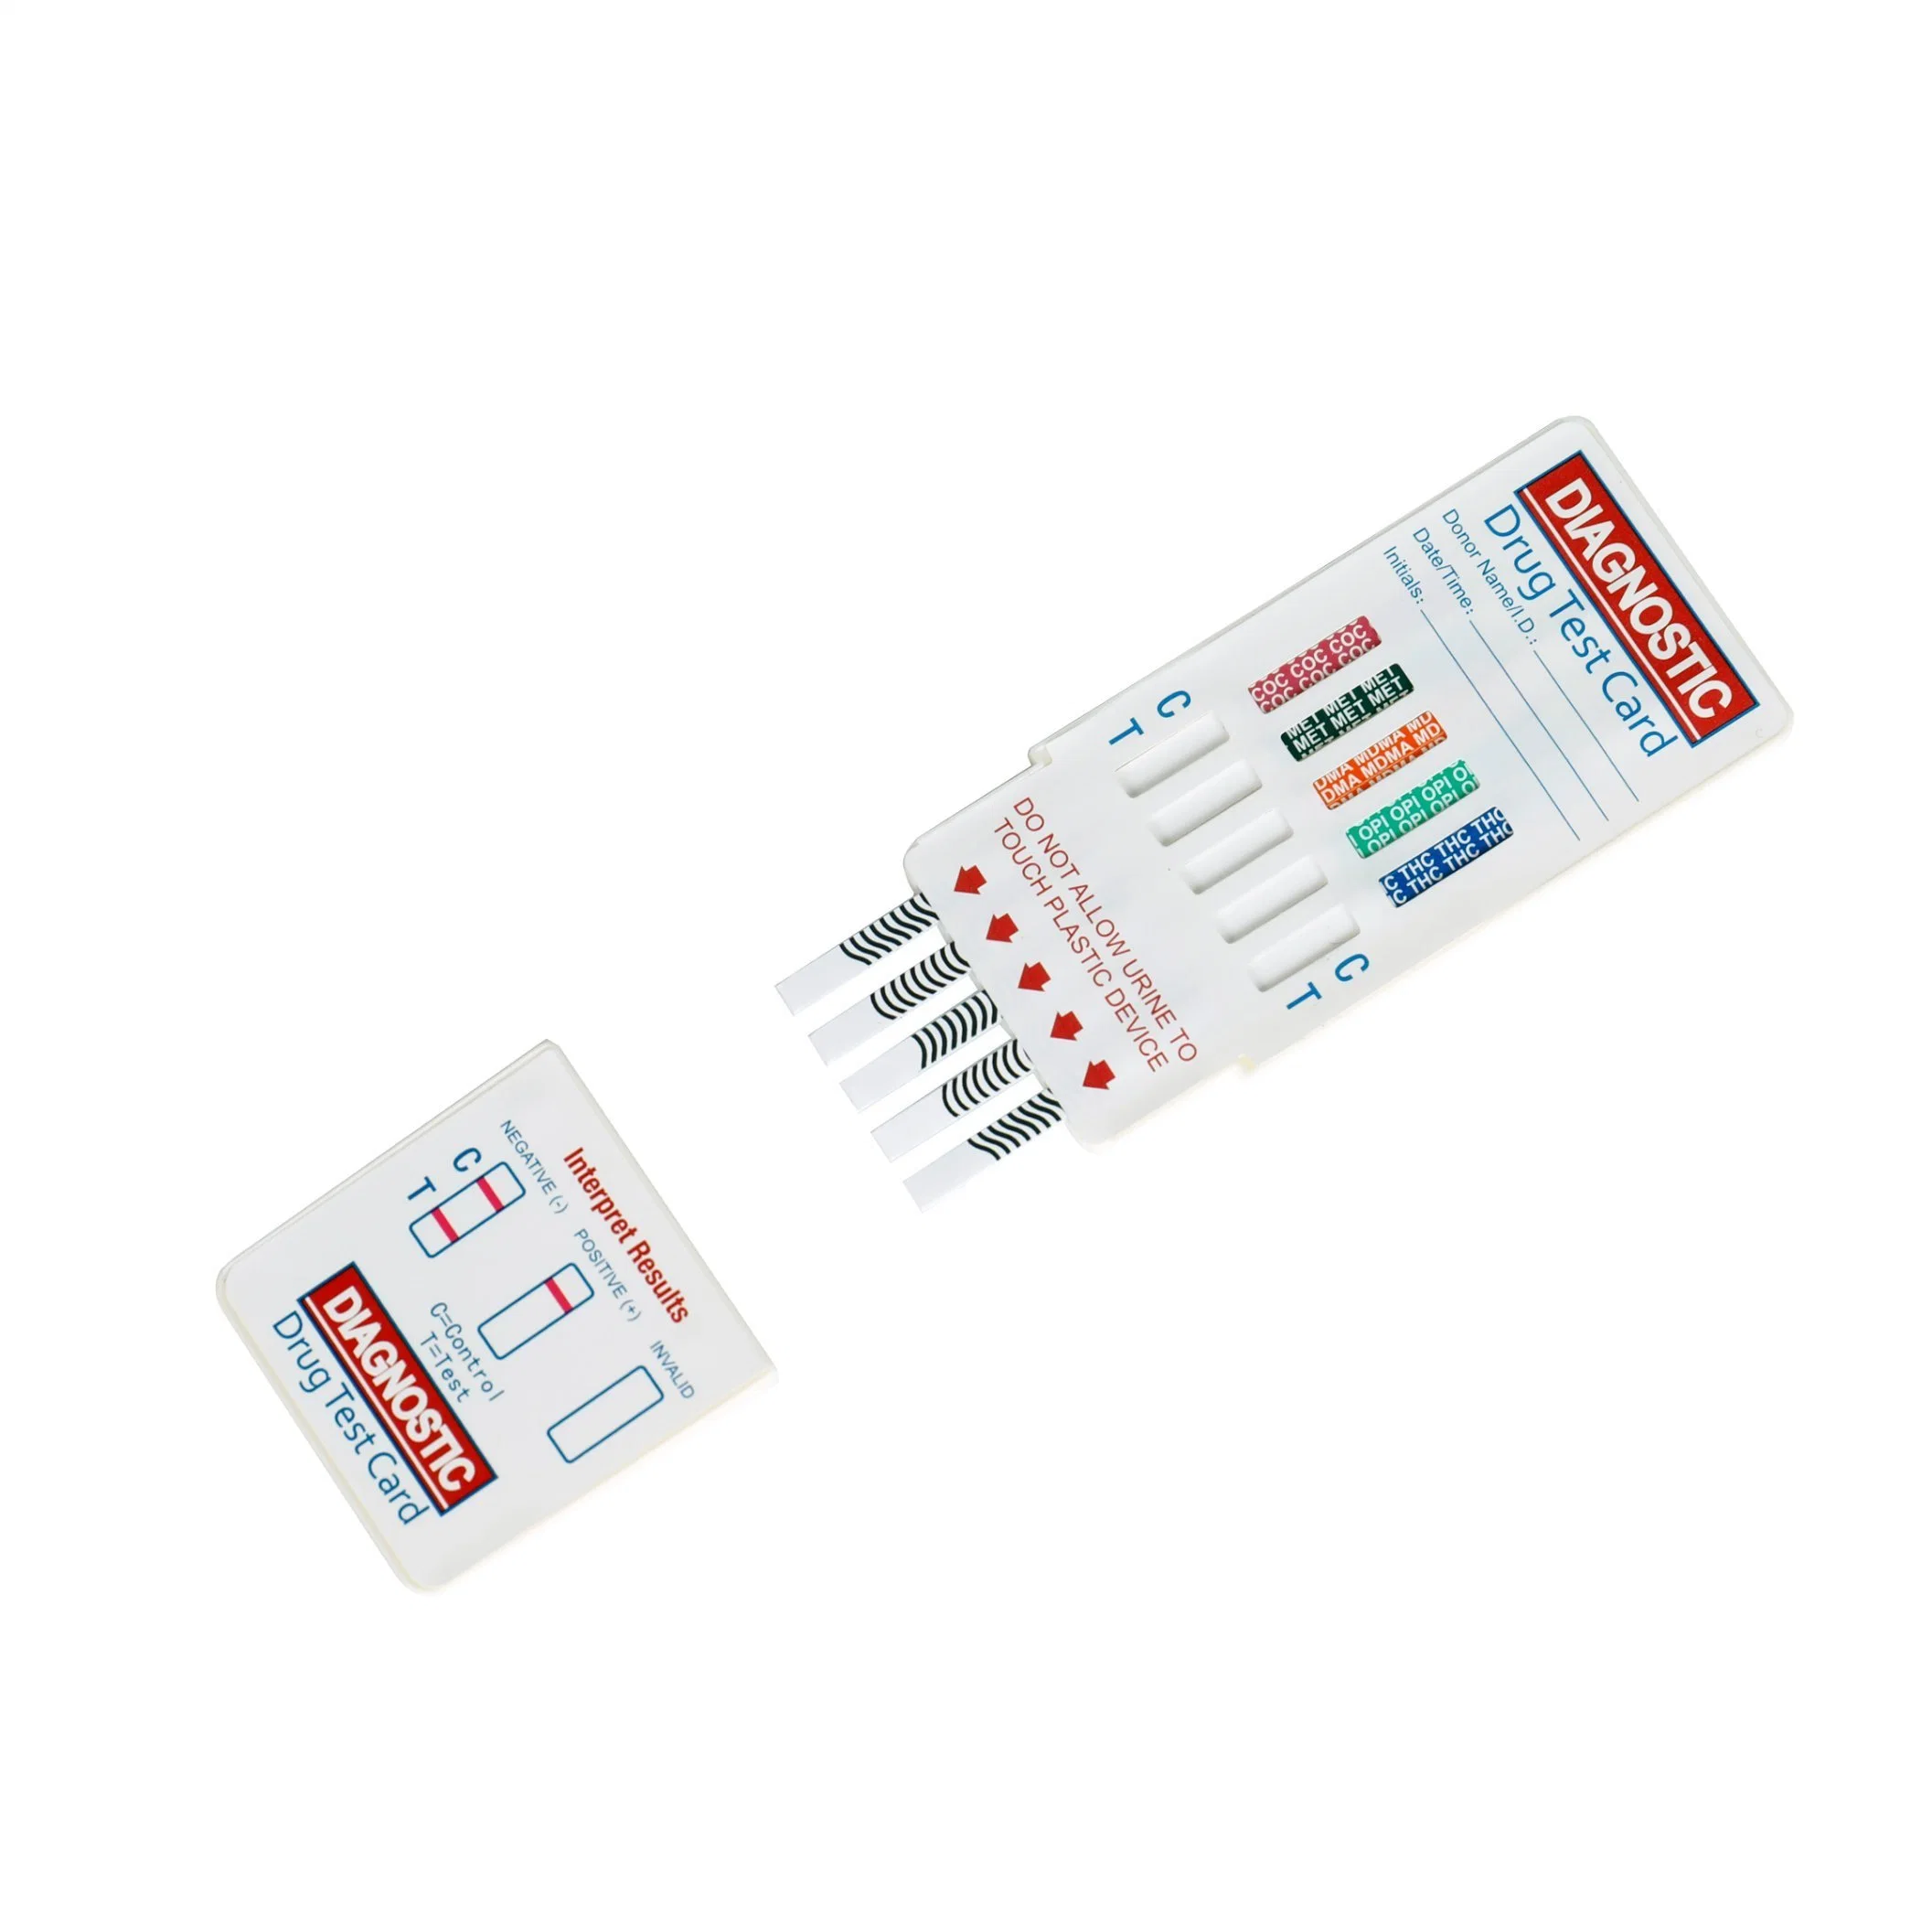 One Step Drug of Abuse Doa Rapid Test Kit in Urine